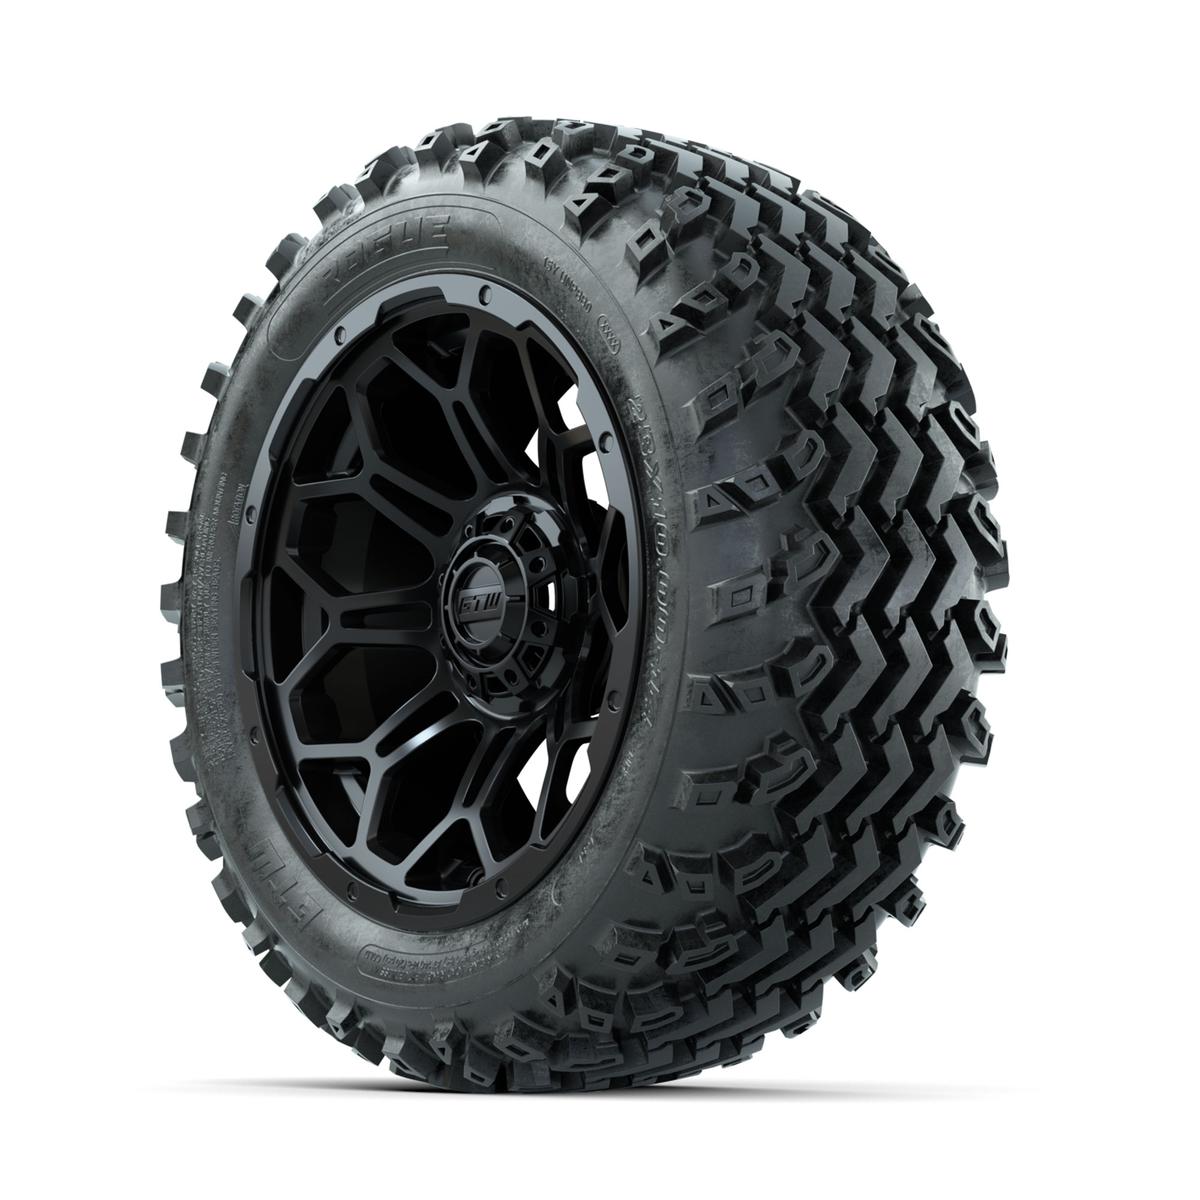 GTW Bravo Matte Black 14 in Wheels with 23x10.00-14 Rogue All Terrain Tires – Full Set